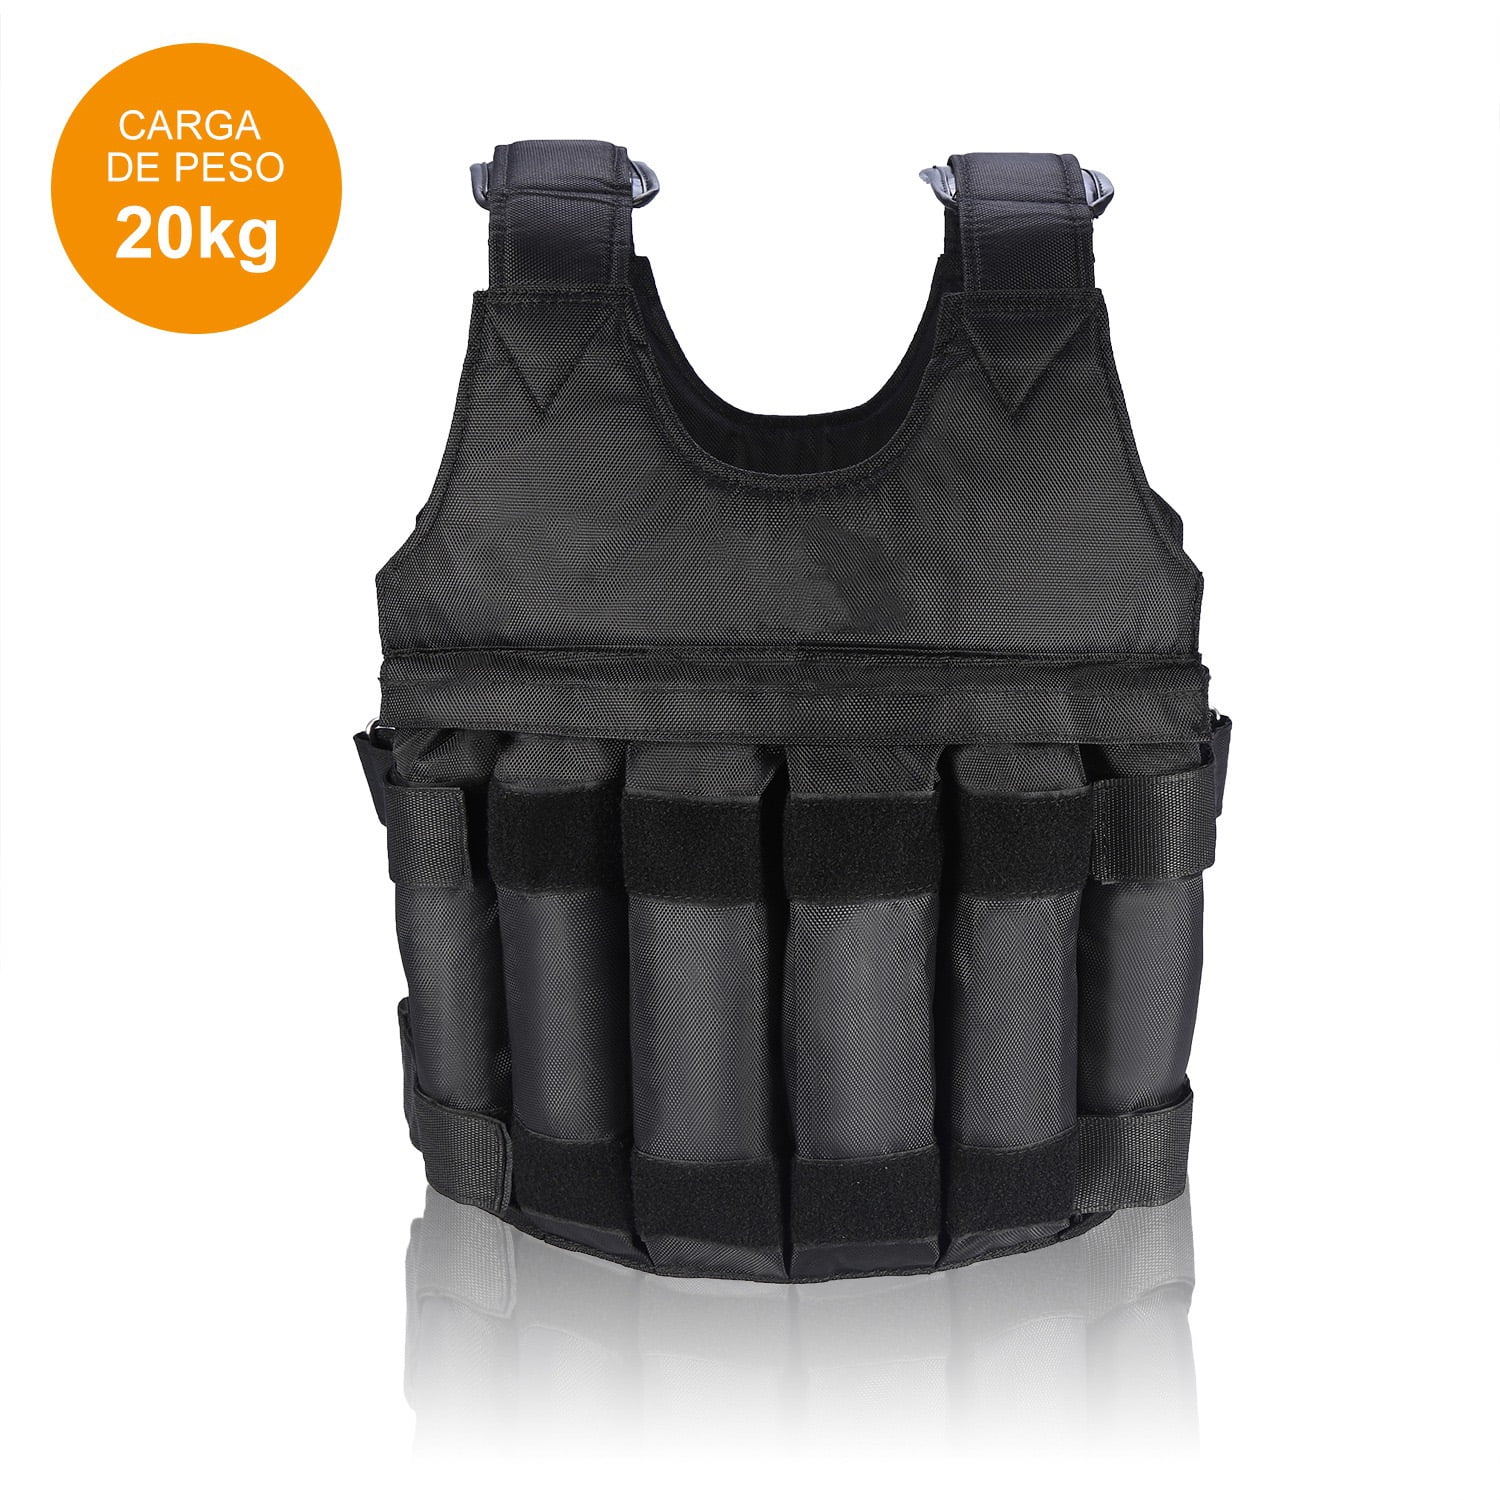 Adjustable Workout Weight 44LB 110LB Weighted Vest Exercise Training Fitness US Black